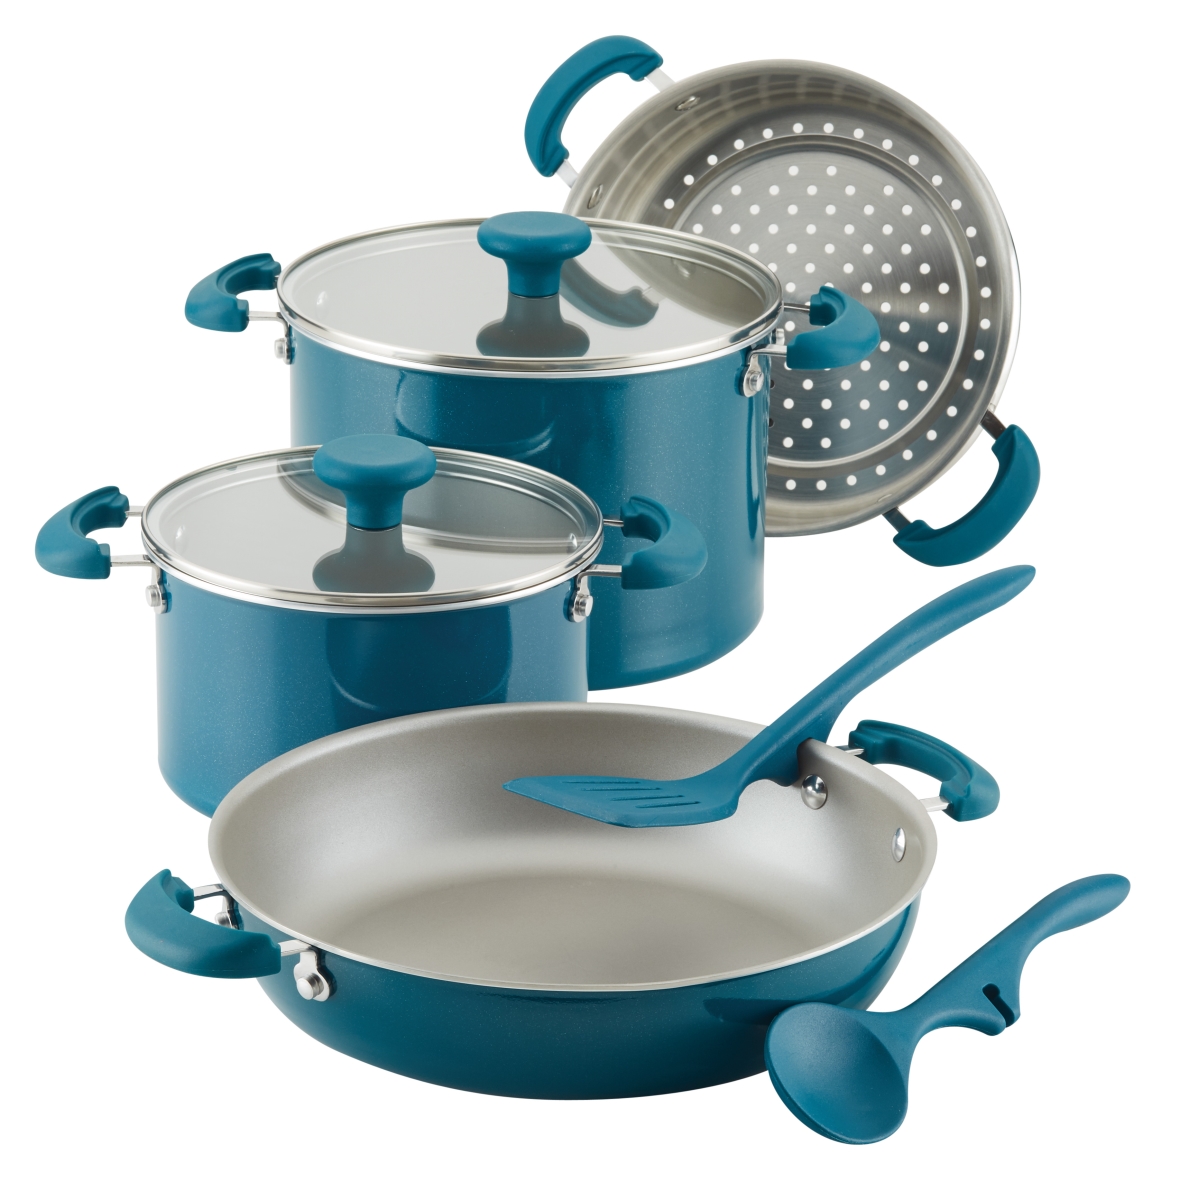 Picture of Rachael Ray 12167 Create Delicious Stackable Nonstick Cookware Set - Teal Shimmer, 8 Piece